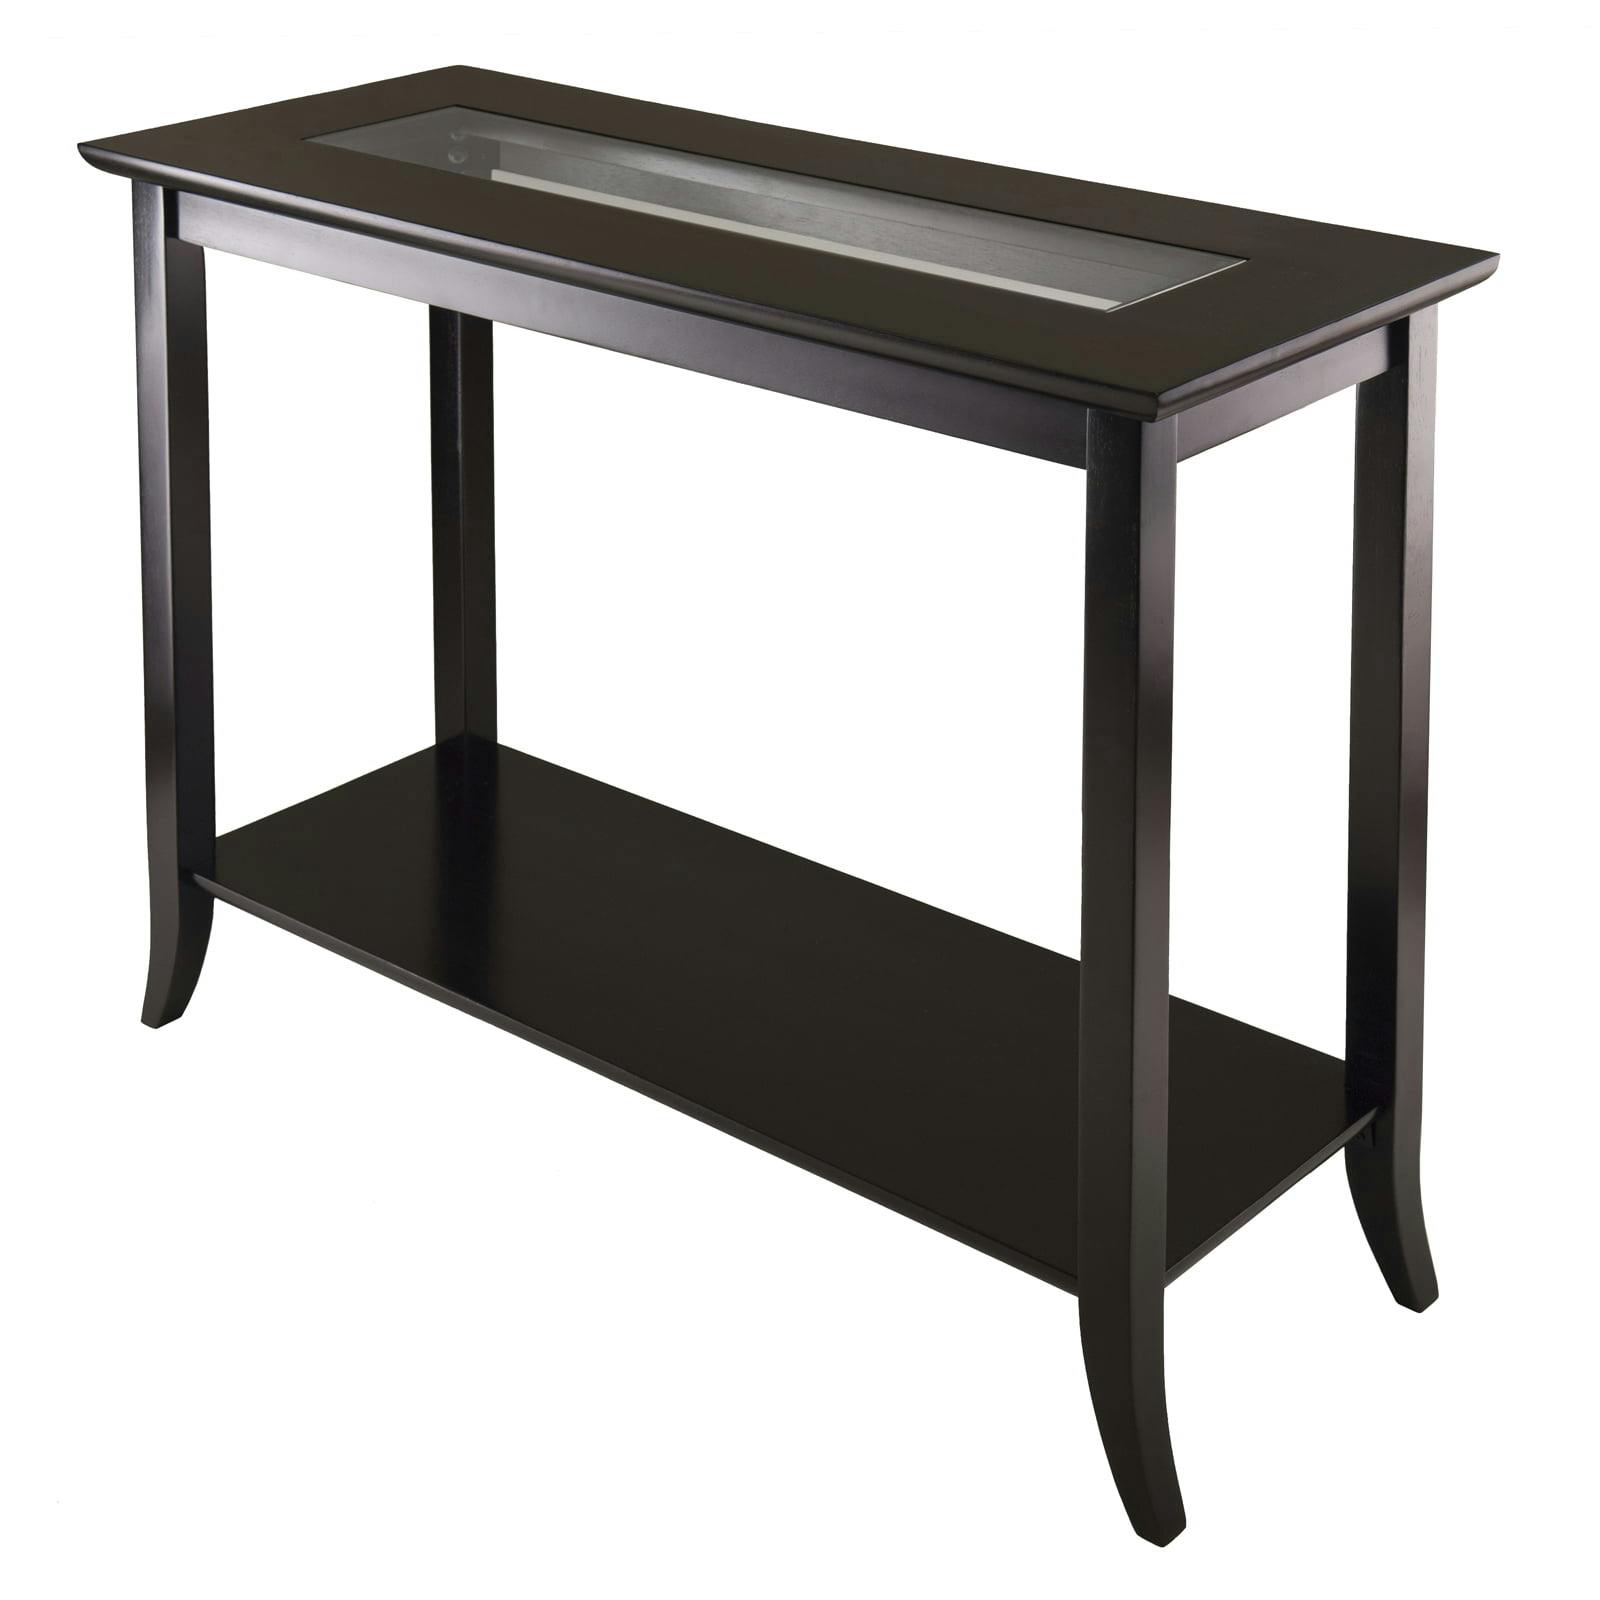 Winsome Genoa Espresso Rectangular Console Table with Glass Top and Shelf